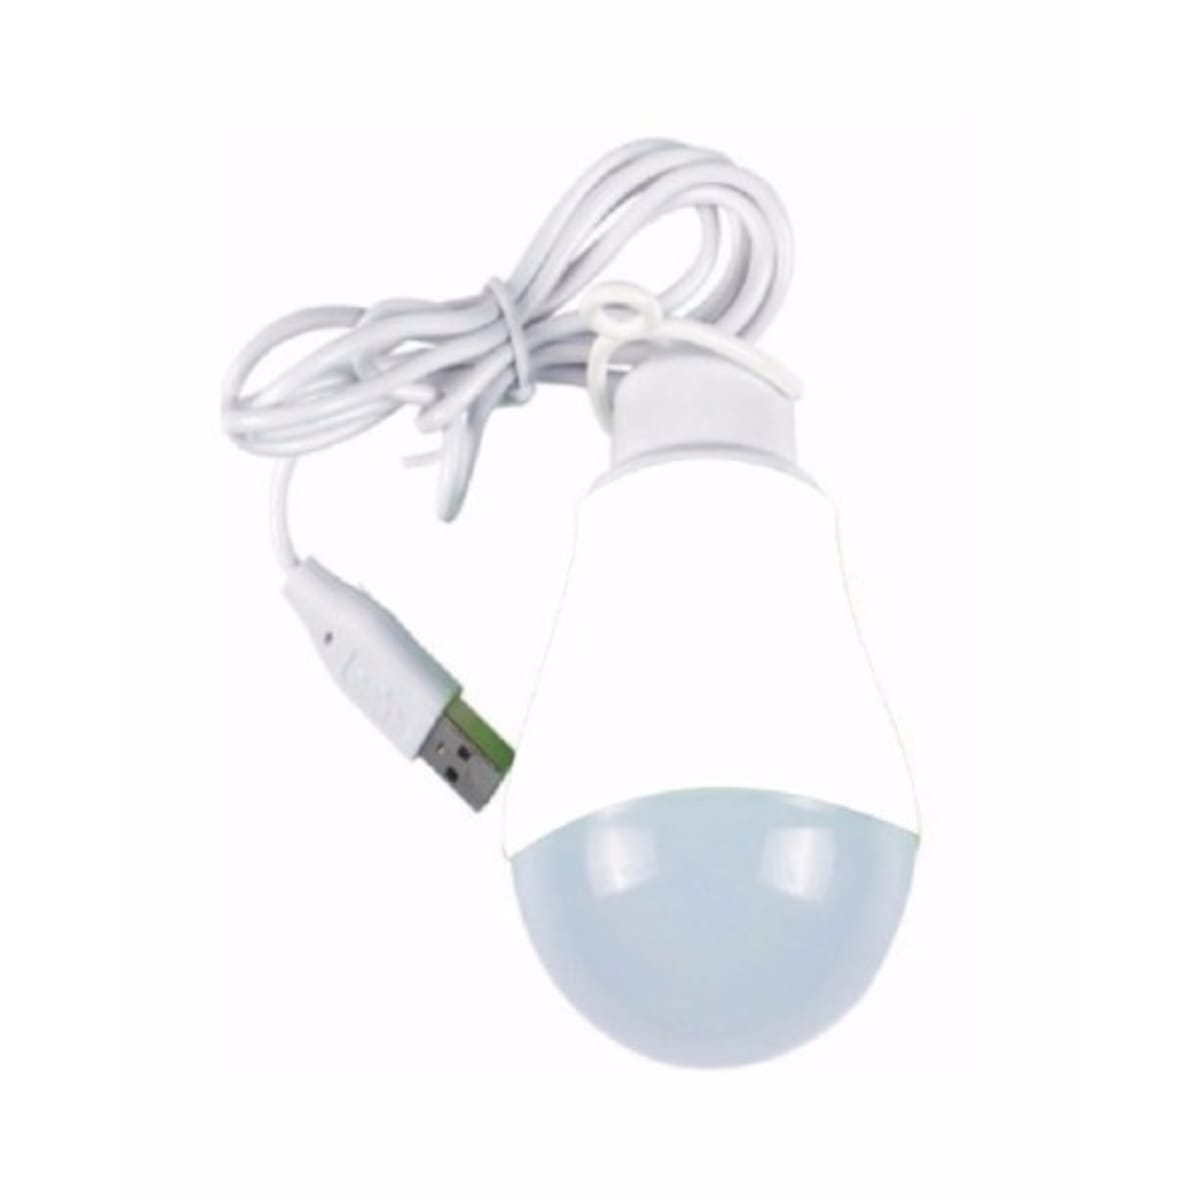 USB-Powered Light Bulb with Cable